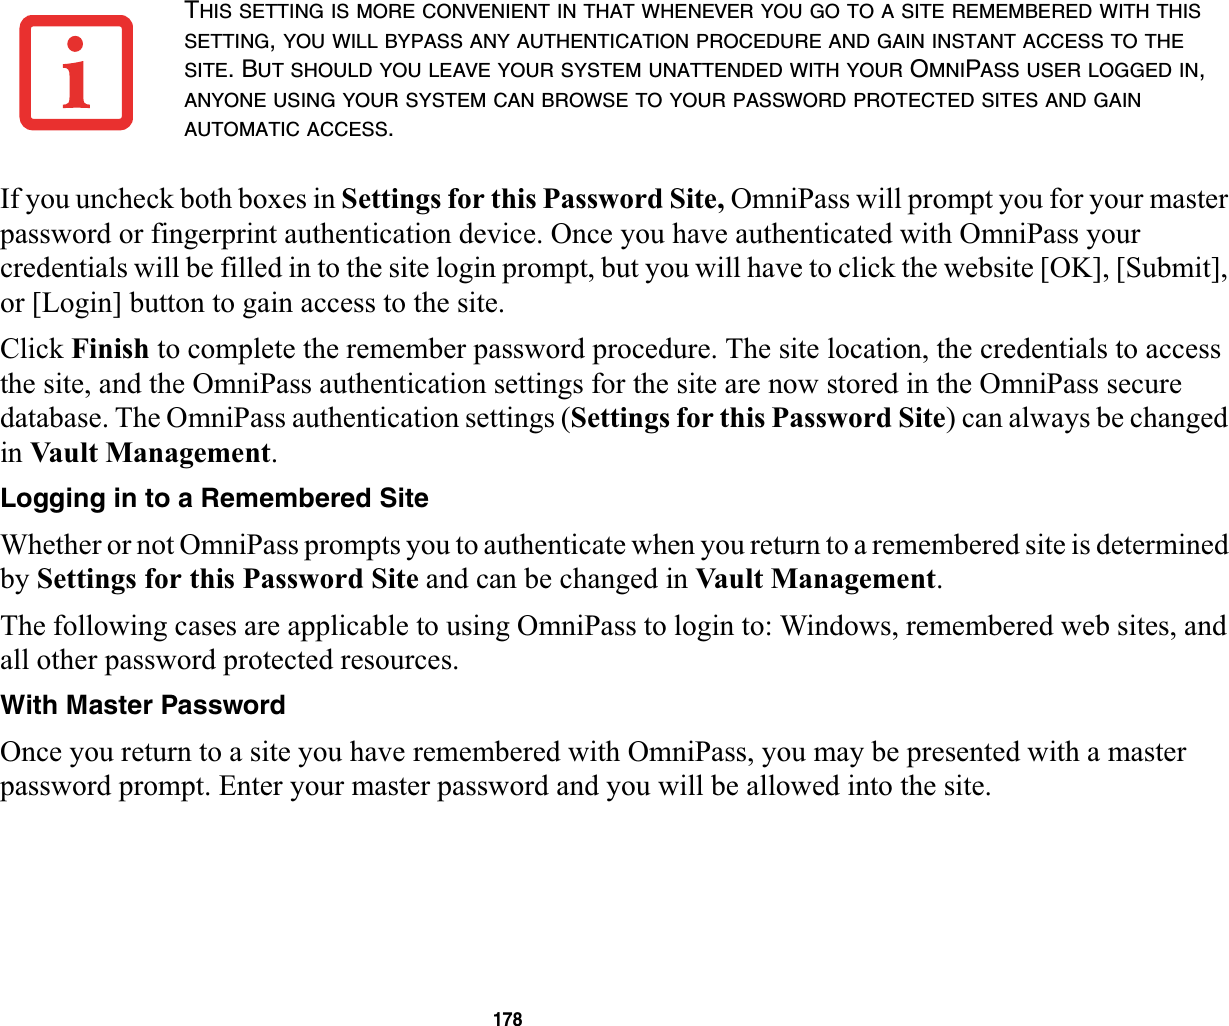 178If you uncheck both boxes in Settings for this Password Site, OmniPass will prompt you for your master password or fingerprint authentication device. Once you have authenticated with OmniPass your credentials will be filled in to the site login prompt, but you will have to click the website [OK], [Submit], or [Login] button to gain access to the site.Click Finish to complete the remember password procedure. The site location, the credentials to access the site, and the OmniPass authentication settings for the site are now stored in the OmniPass secure database. The OmniPass authentication settings (Settings for this Password Site) can always be changed in Vault Management.Logging in to a Remembered SiteWhether or not OmniPass prompts you to authenticate when you return to a remembered site is determined by Settings for this Password Site and can be changed in Vault Management.The following cases are applicable to using OmniPass to login to: Windows, remembered web sites, and all other password protected resources.With Master PasswordOnce you return to a site you have remembered with OmniPass, you may be presented with a master password prompt. Enter your master password and you will be allowed into the site.THIS SETTING IS MORE CONVENIENT IN THAT WHENEVER YOU GO TO A SITE REMEMBERED WITH THISSETTING,YOU WILL BYPASS ANY AUTHENTICATION PROCEDURE AND GAIN INSTANT ACCESS TO THESITE. BUT SHOULD YOU LEAVE YOUR SYSTEM UNATTENDED WITH YOUR OMNIPASS USER LOGGED IN,ANYONE USING YOUR SYSTEM CAN BROWSE TO YOUR PASSWORD PROTECTED SITES AND GAINAUTOMATIC ACCESS.